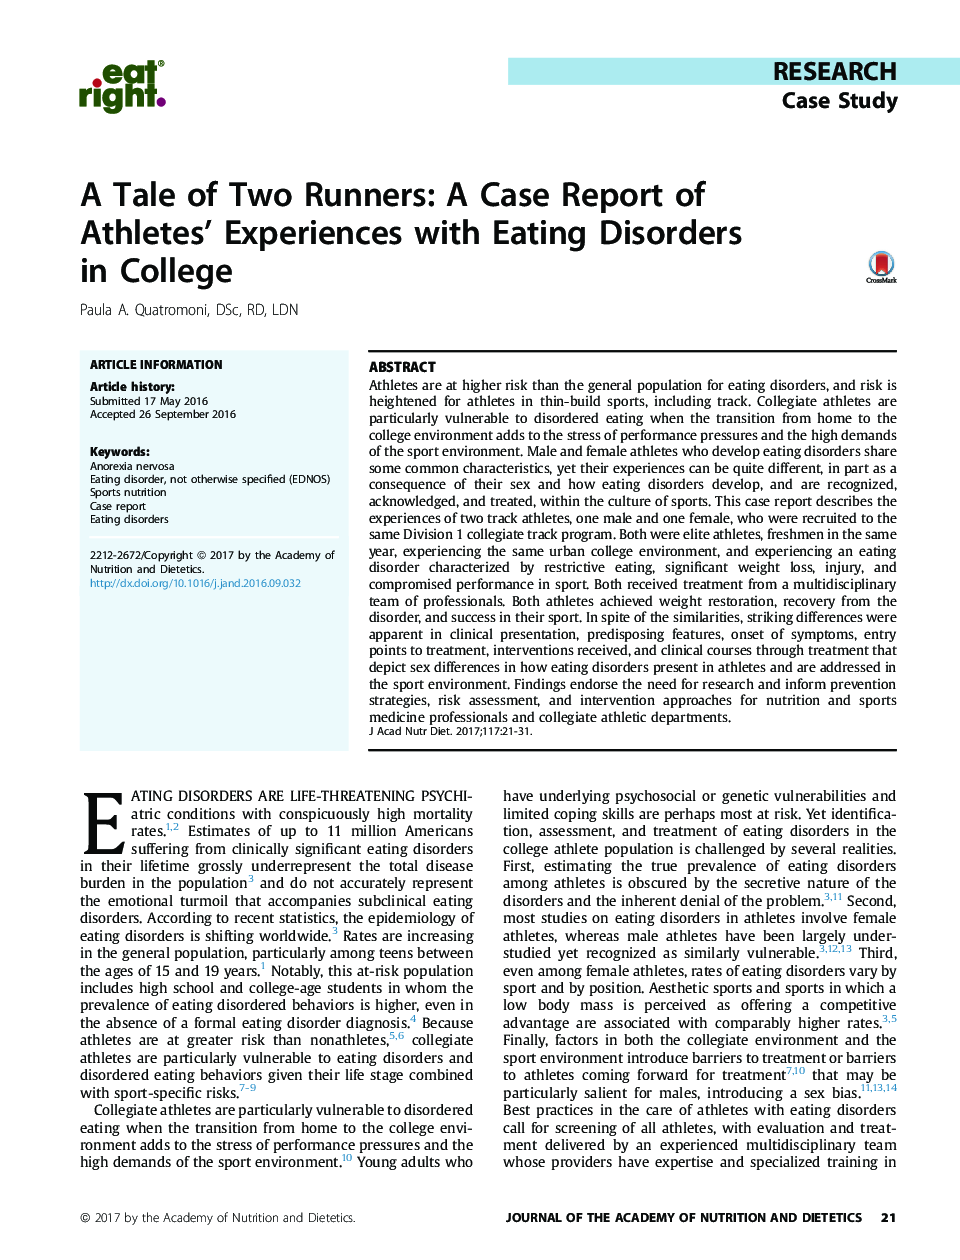 A Tale of Two Runners: A Case Report of Athletes' Experiences with Eating Disorders inÂ College